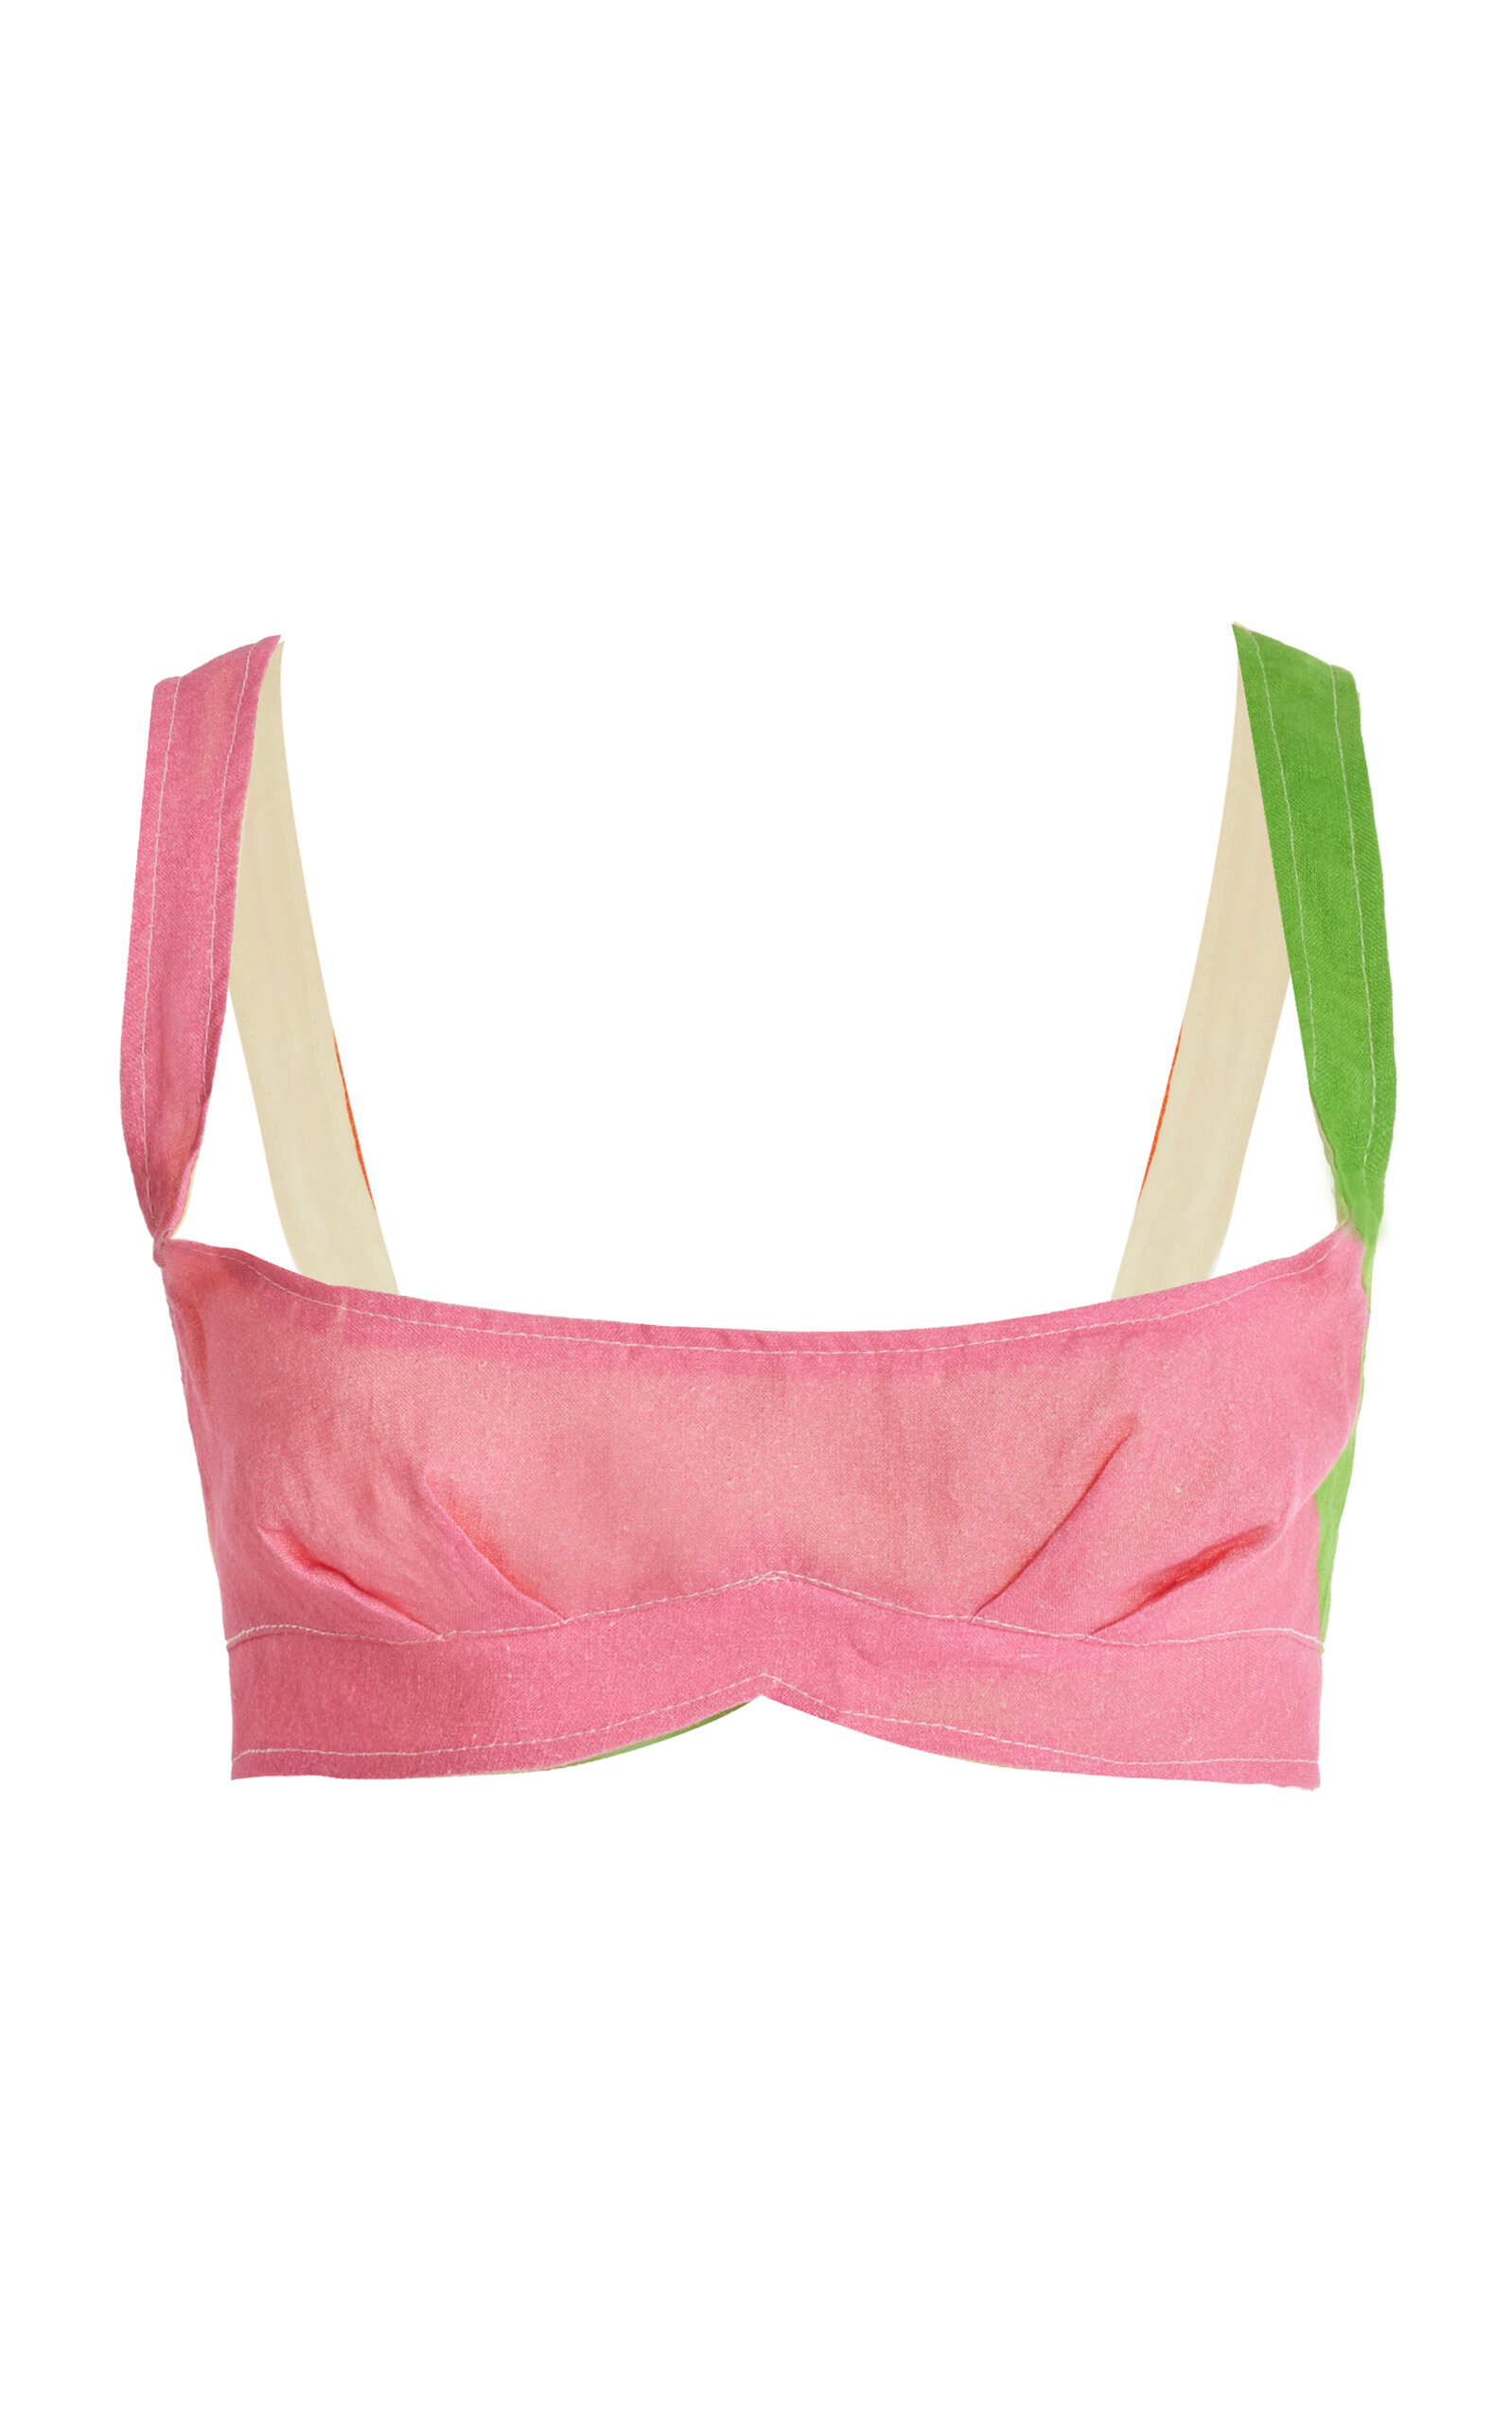 https://www.modaoperandi.com/assets/images/products/947352/585245/large_house-of-aama-multi-exclusive-colorblock-linen-bra-top.jpg?_t=1684433924